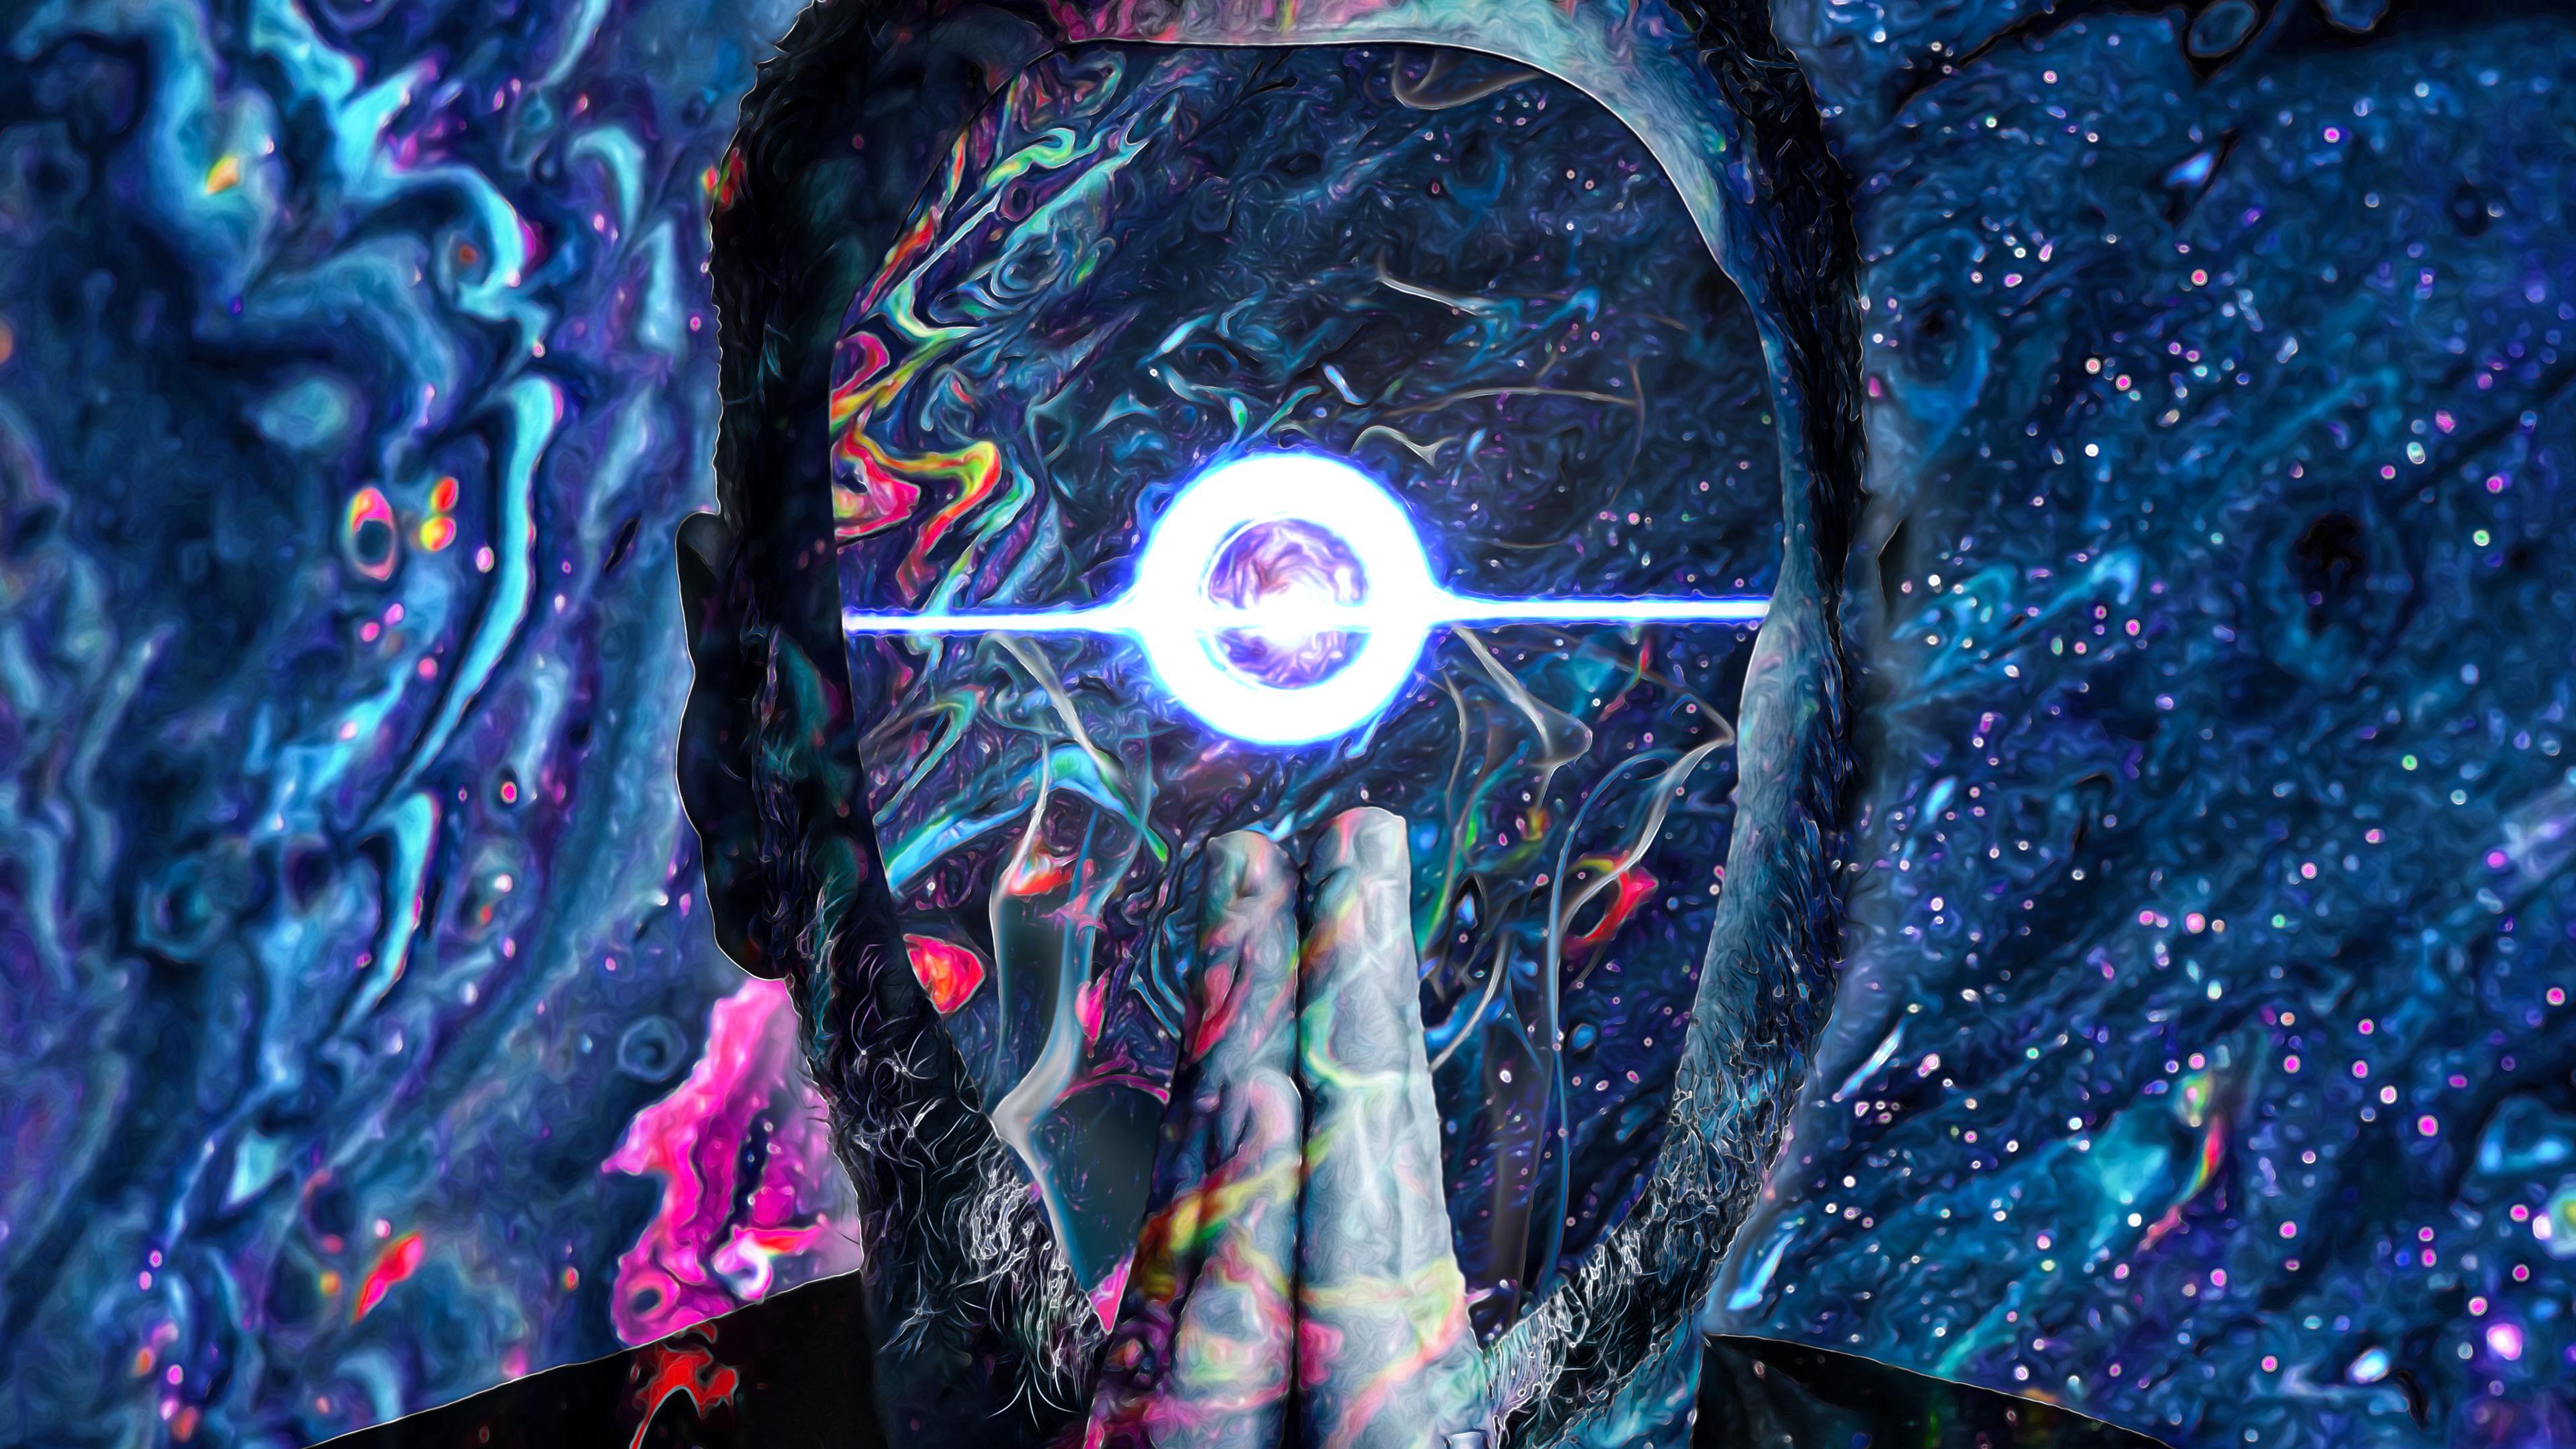 A man with his hands in a praying position in front of his face, with a swirling galaxy background - Peace